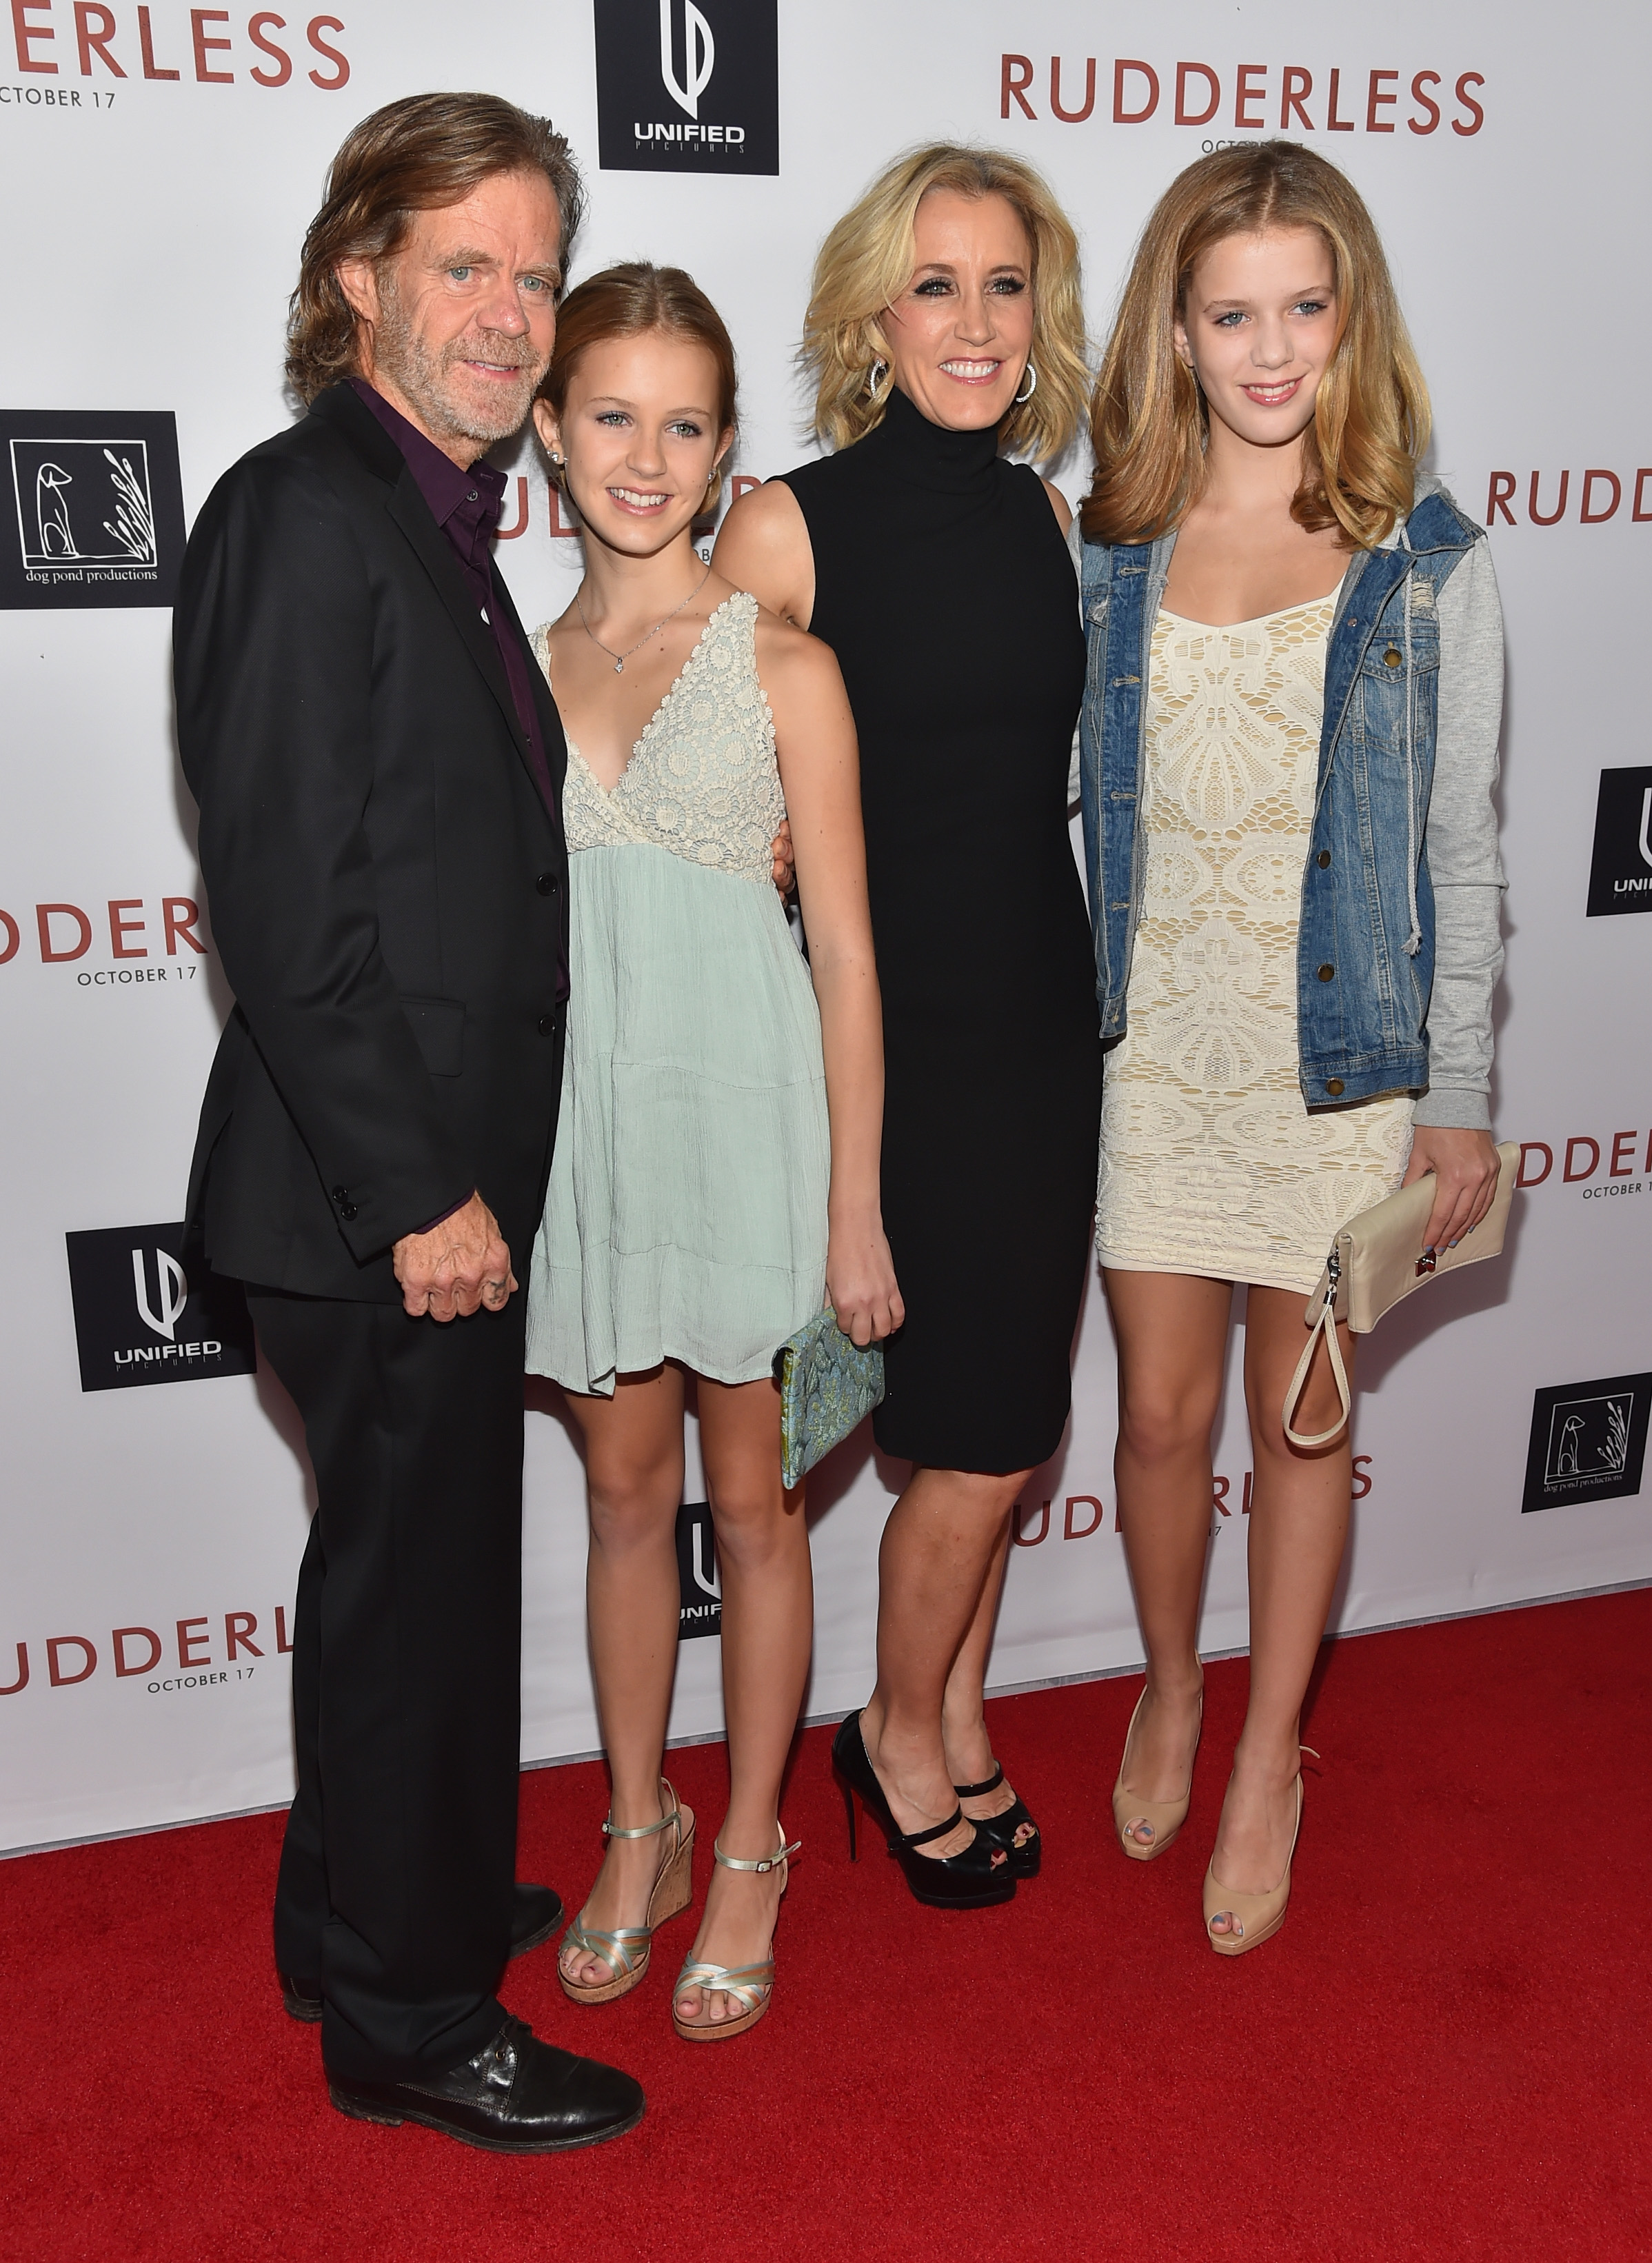 William H. Macy, Grace Macy, Felicity Huffman and Sophia Macy attend the screening of "Rudderless" on October 7, 2014 in Los Angeles, California. | Source: Getty Images